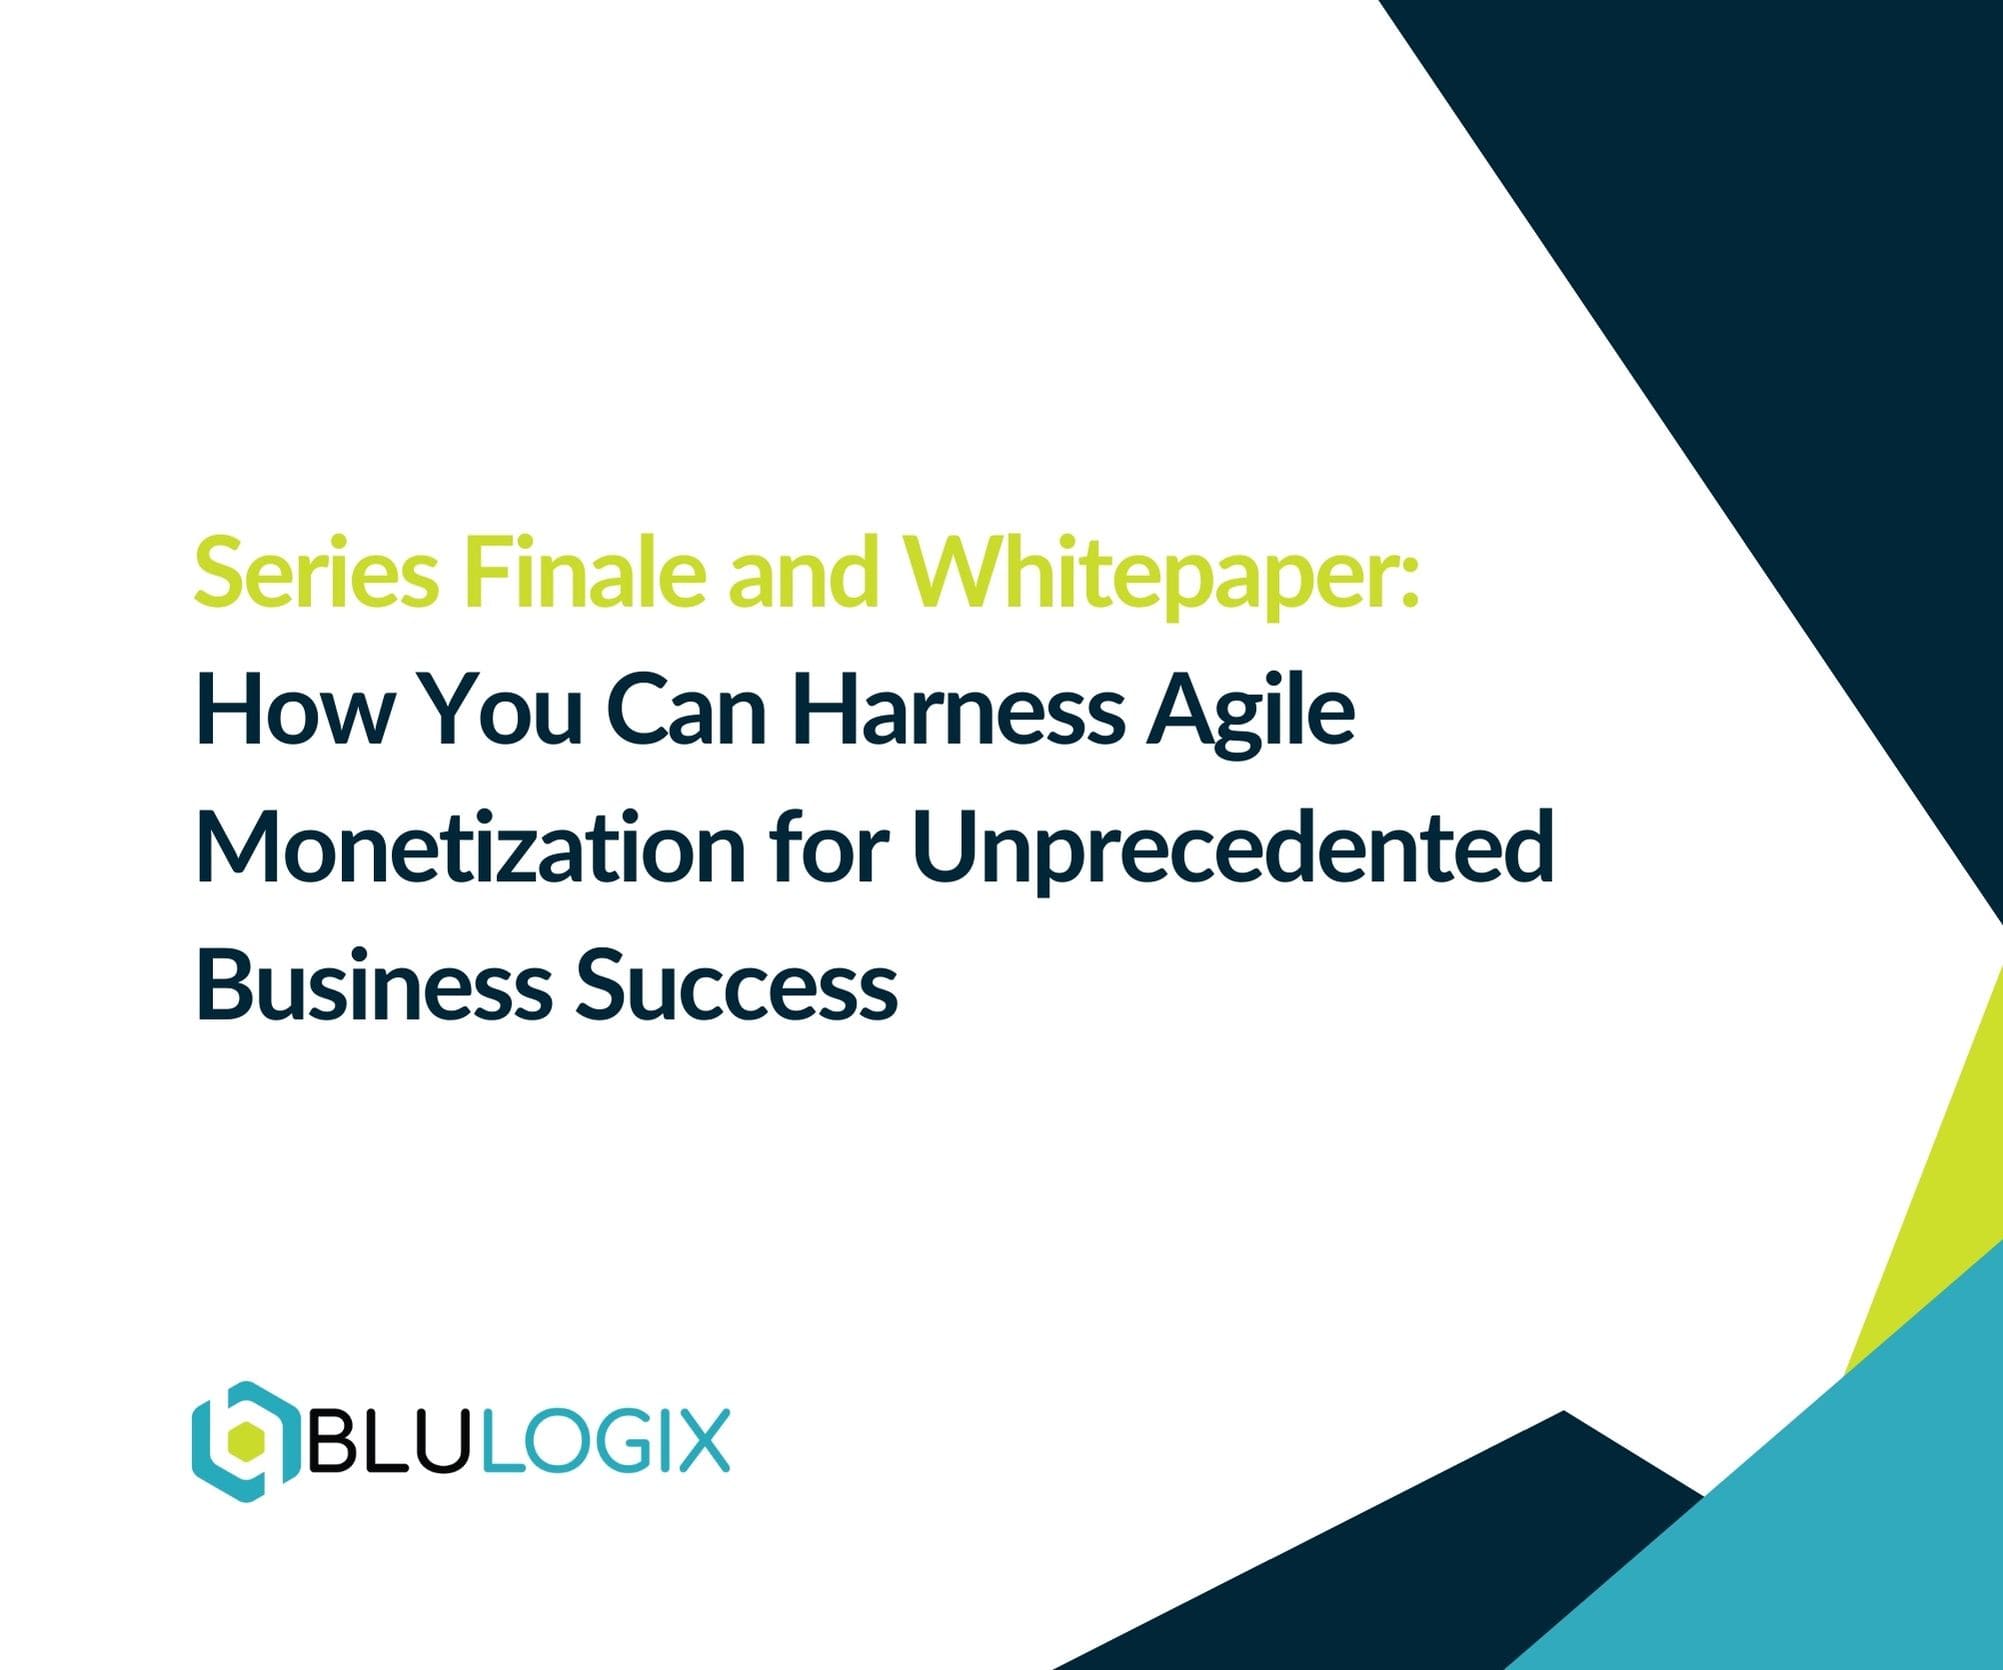 Series Finale and Whitepaper